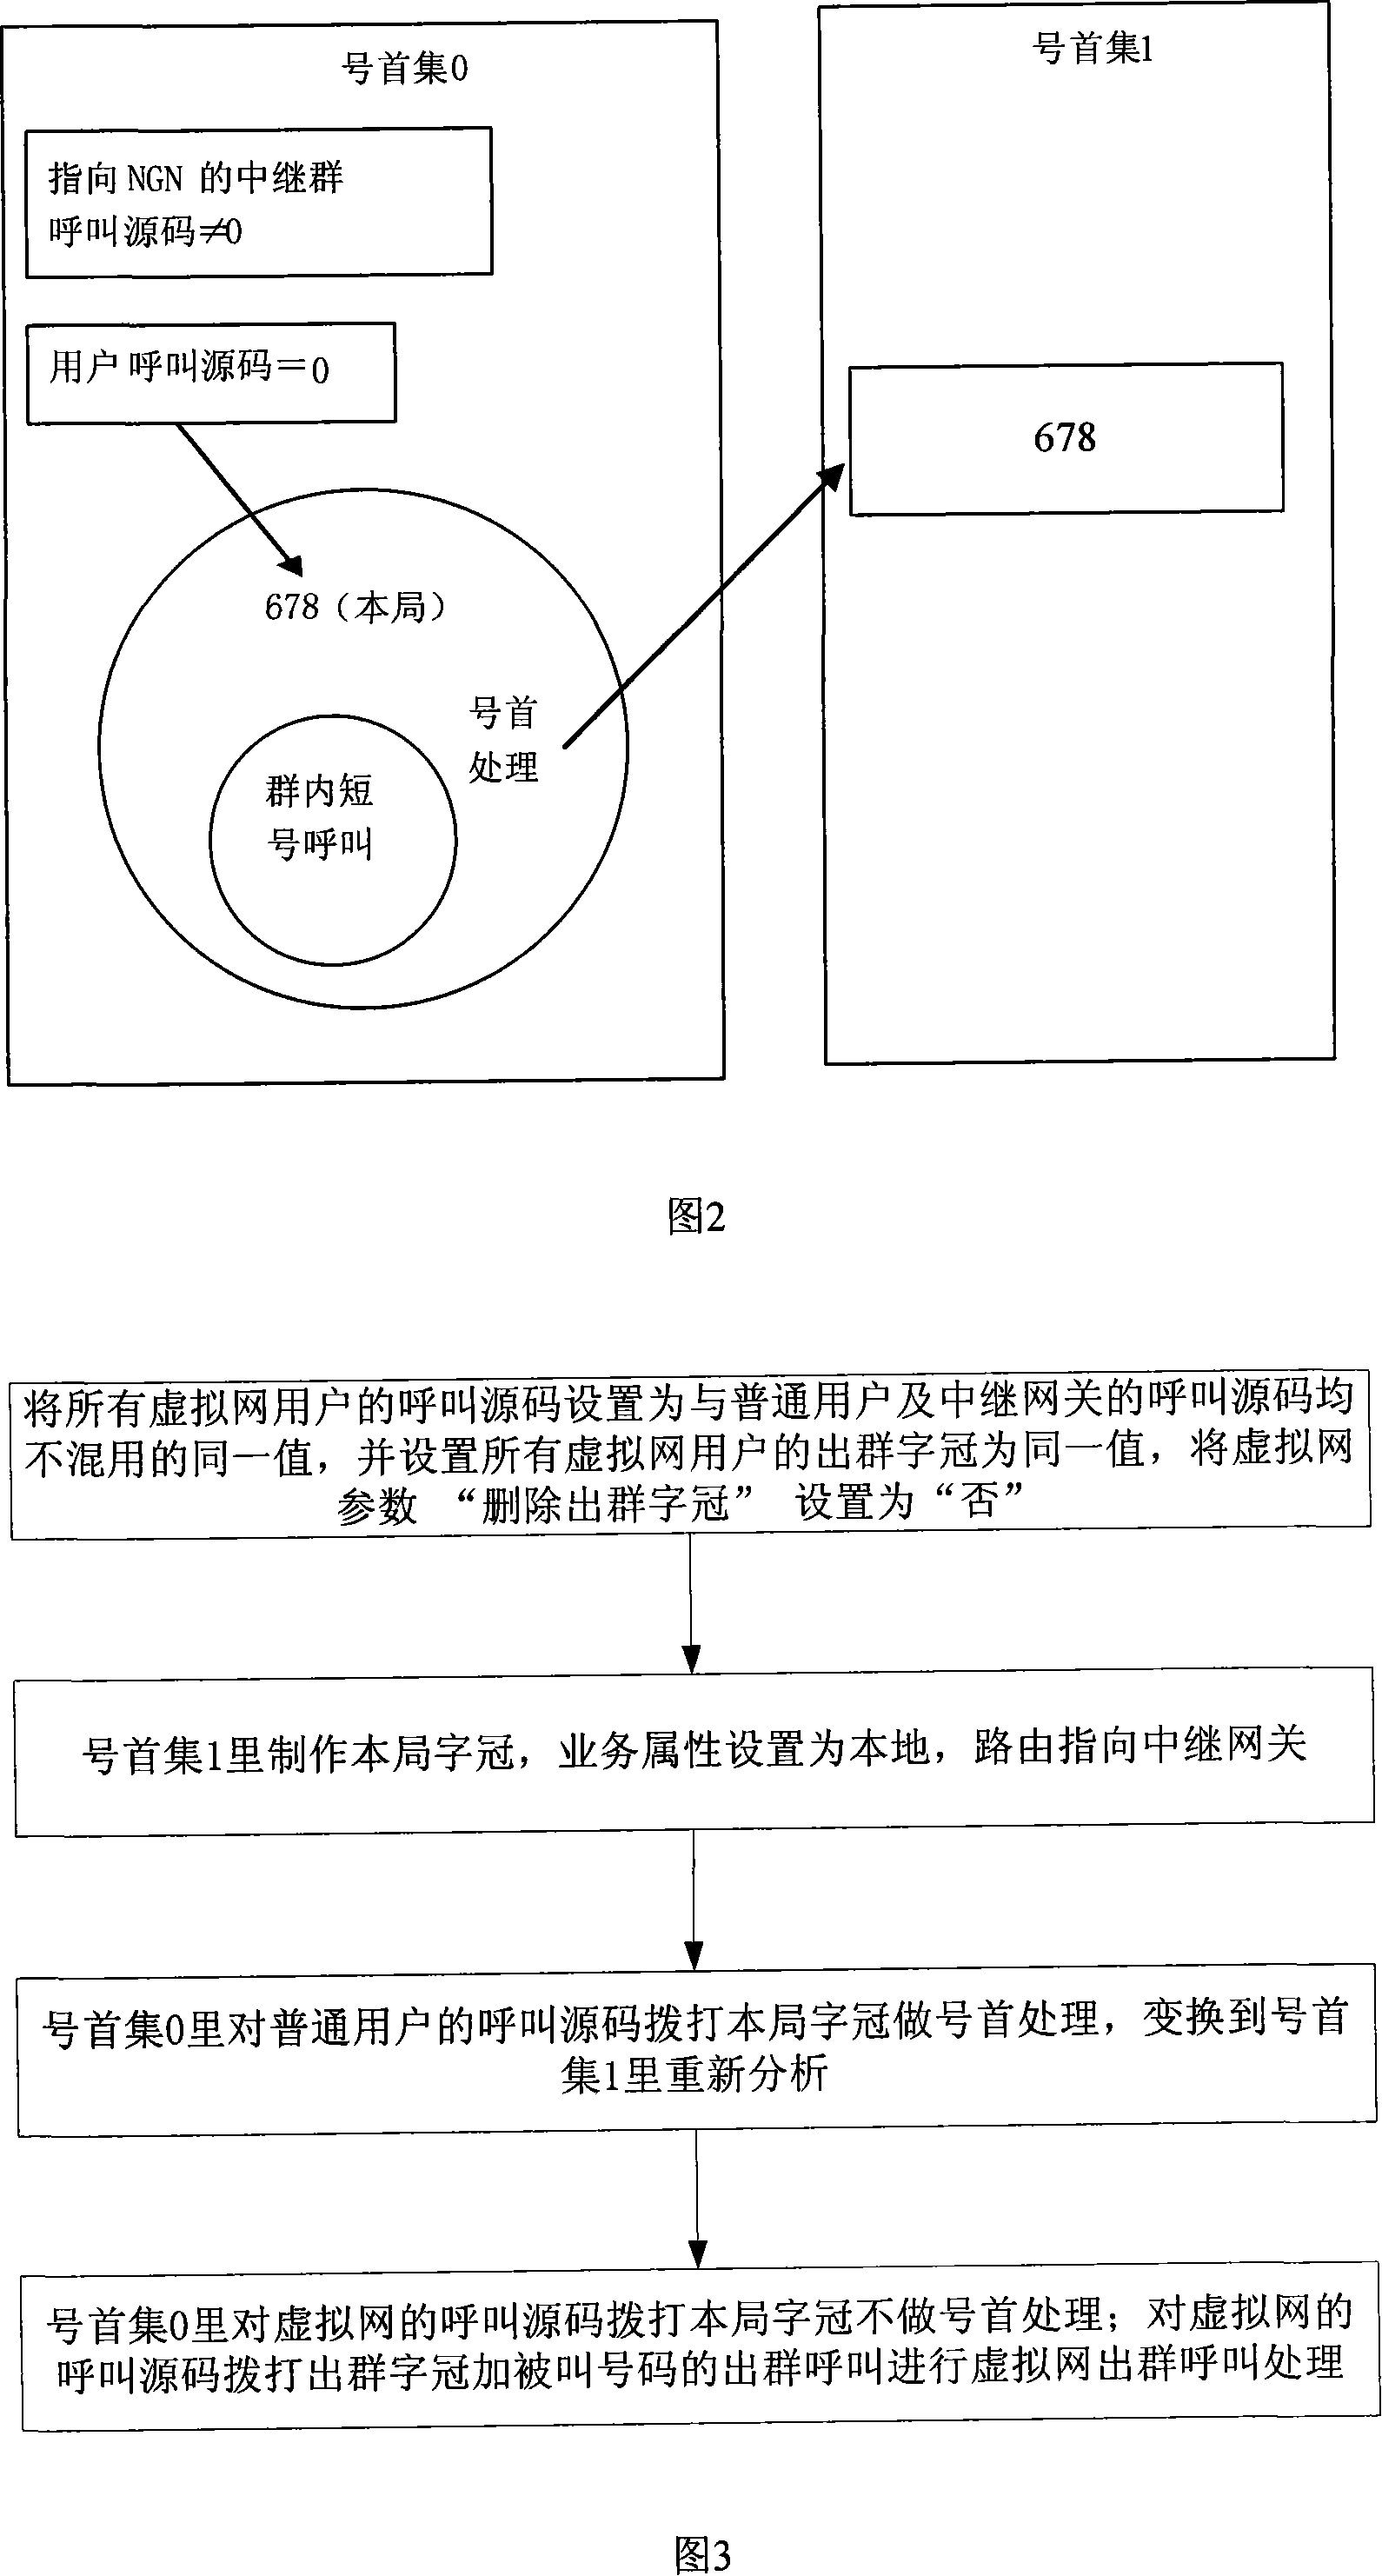 Cleft grafting method for C&C08 switch access to trunking gateway and switch thereof